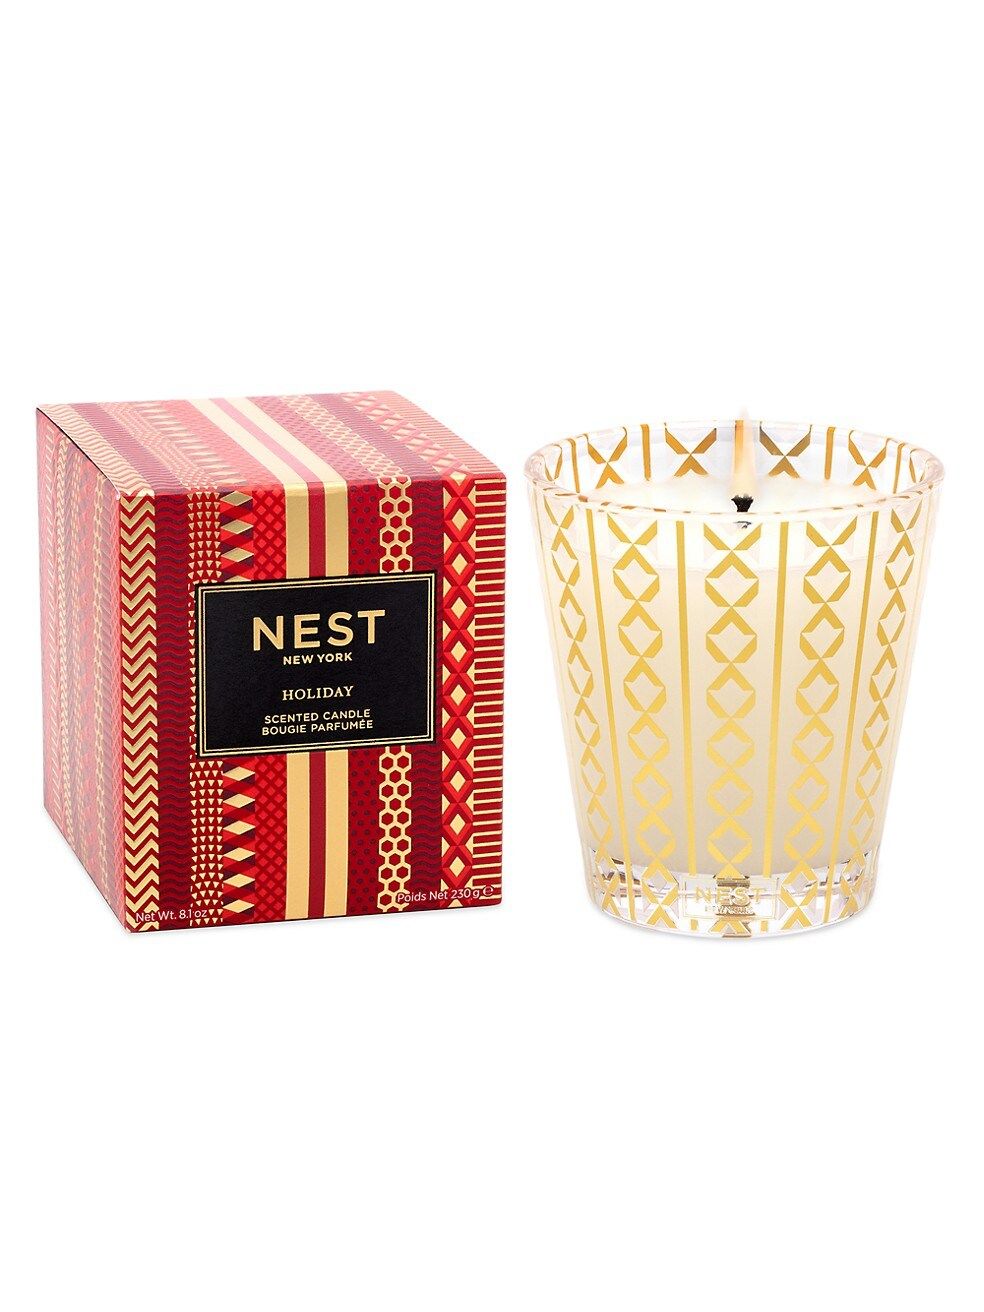 NEST New York Holiday Scented Candle | Saks Fifth Avenue